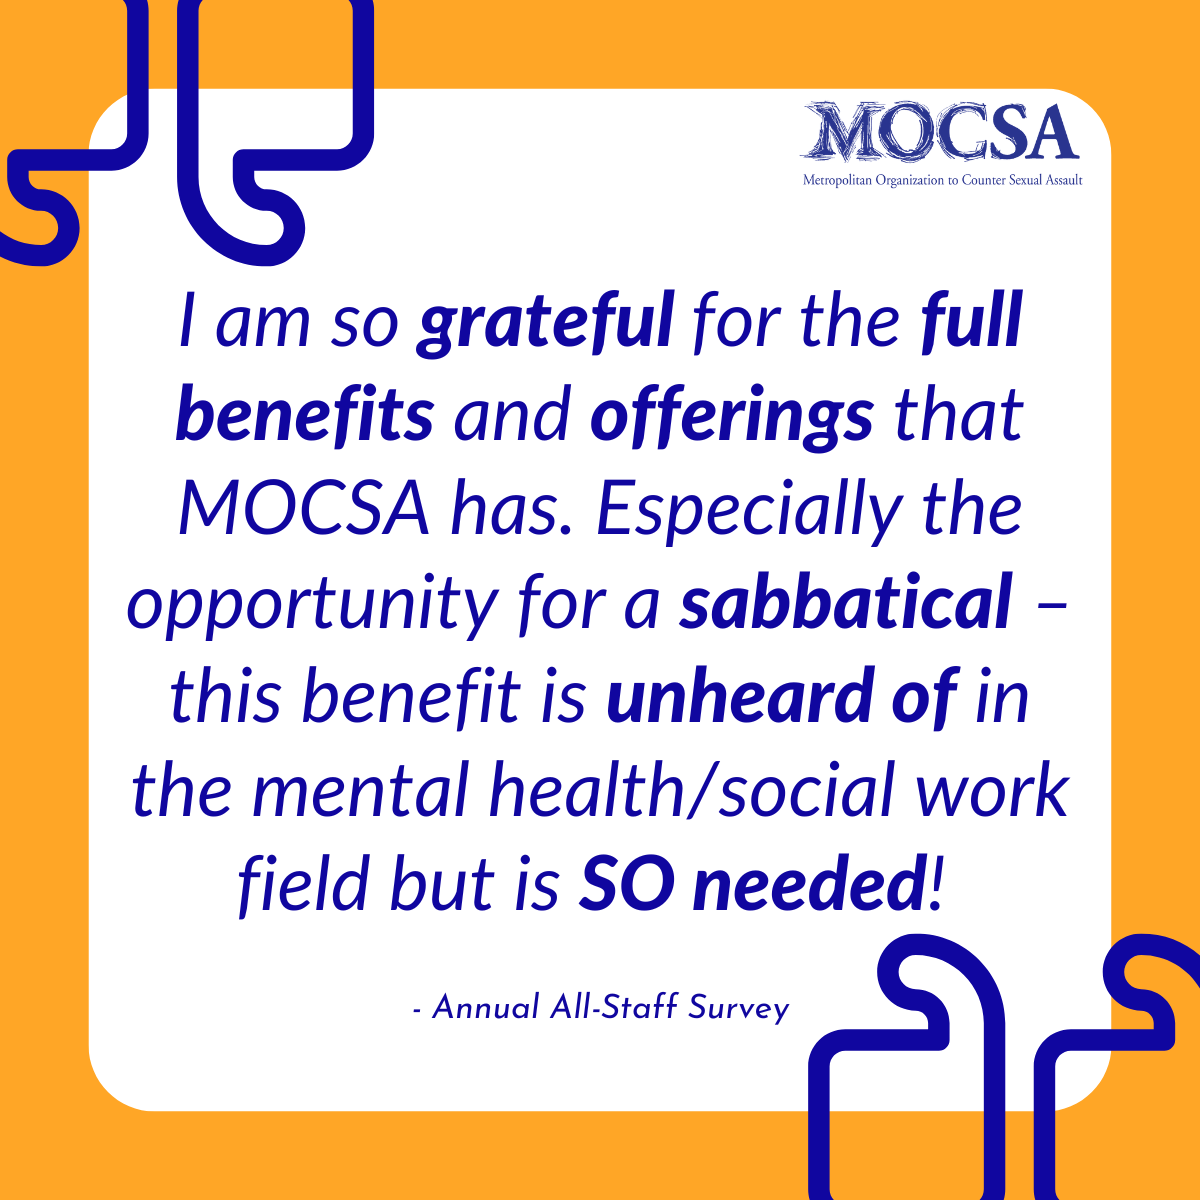 Blue text on white background that reads: I am so grateful for the full benefits and offerings that MOCSA has. Especially the opportunity for a sabbatical – this benefit is unheard of in the mental health/social work field but is SO needed!